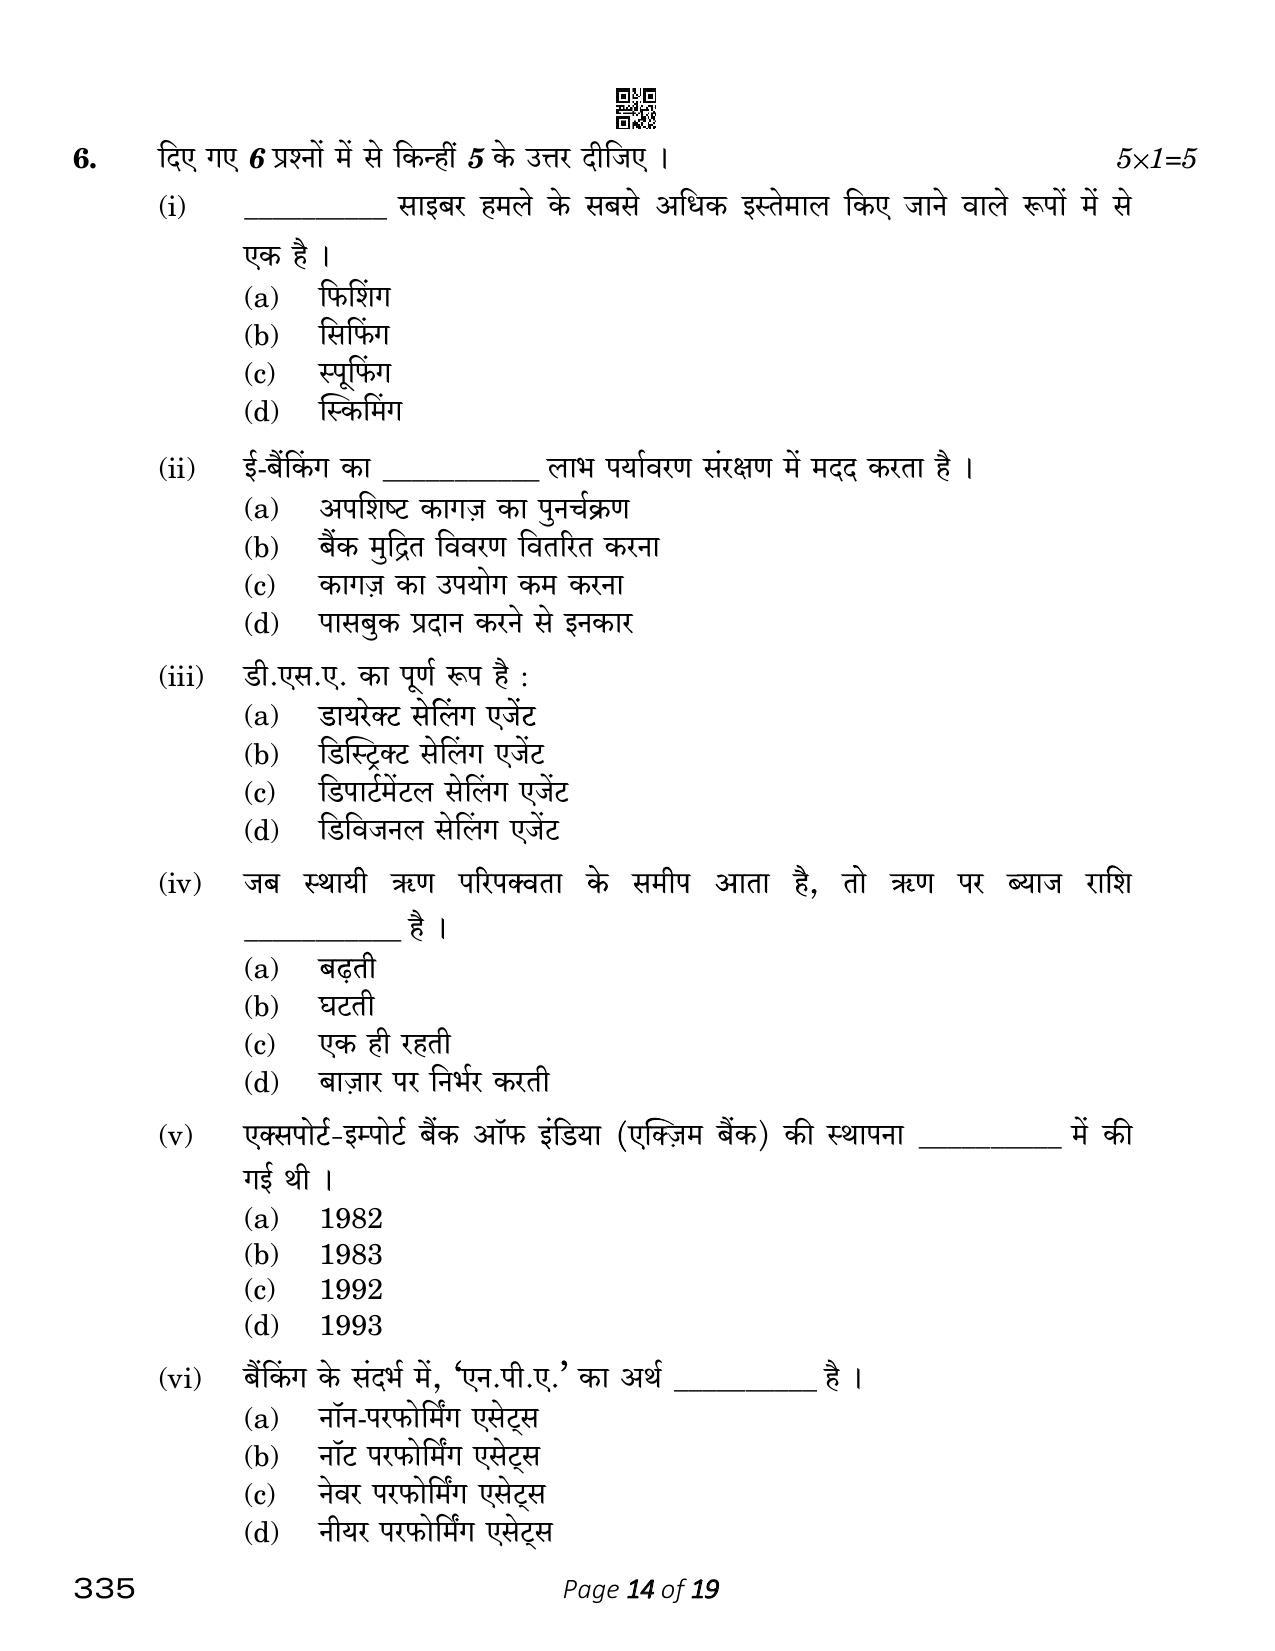 CBSE Class 12 Banking (Compartment) 2023 Question Paper - Page 14